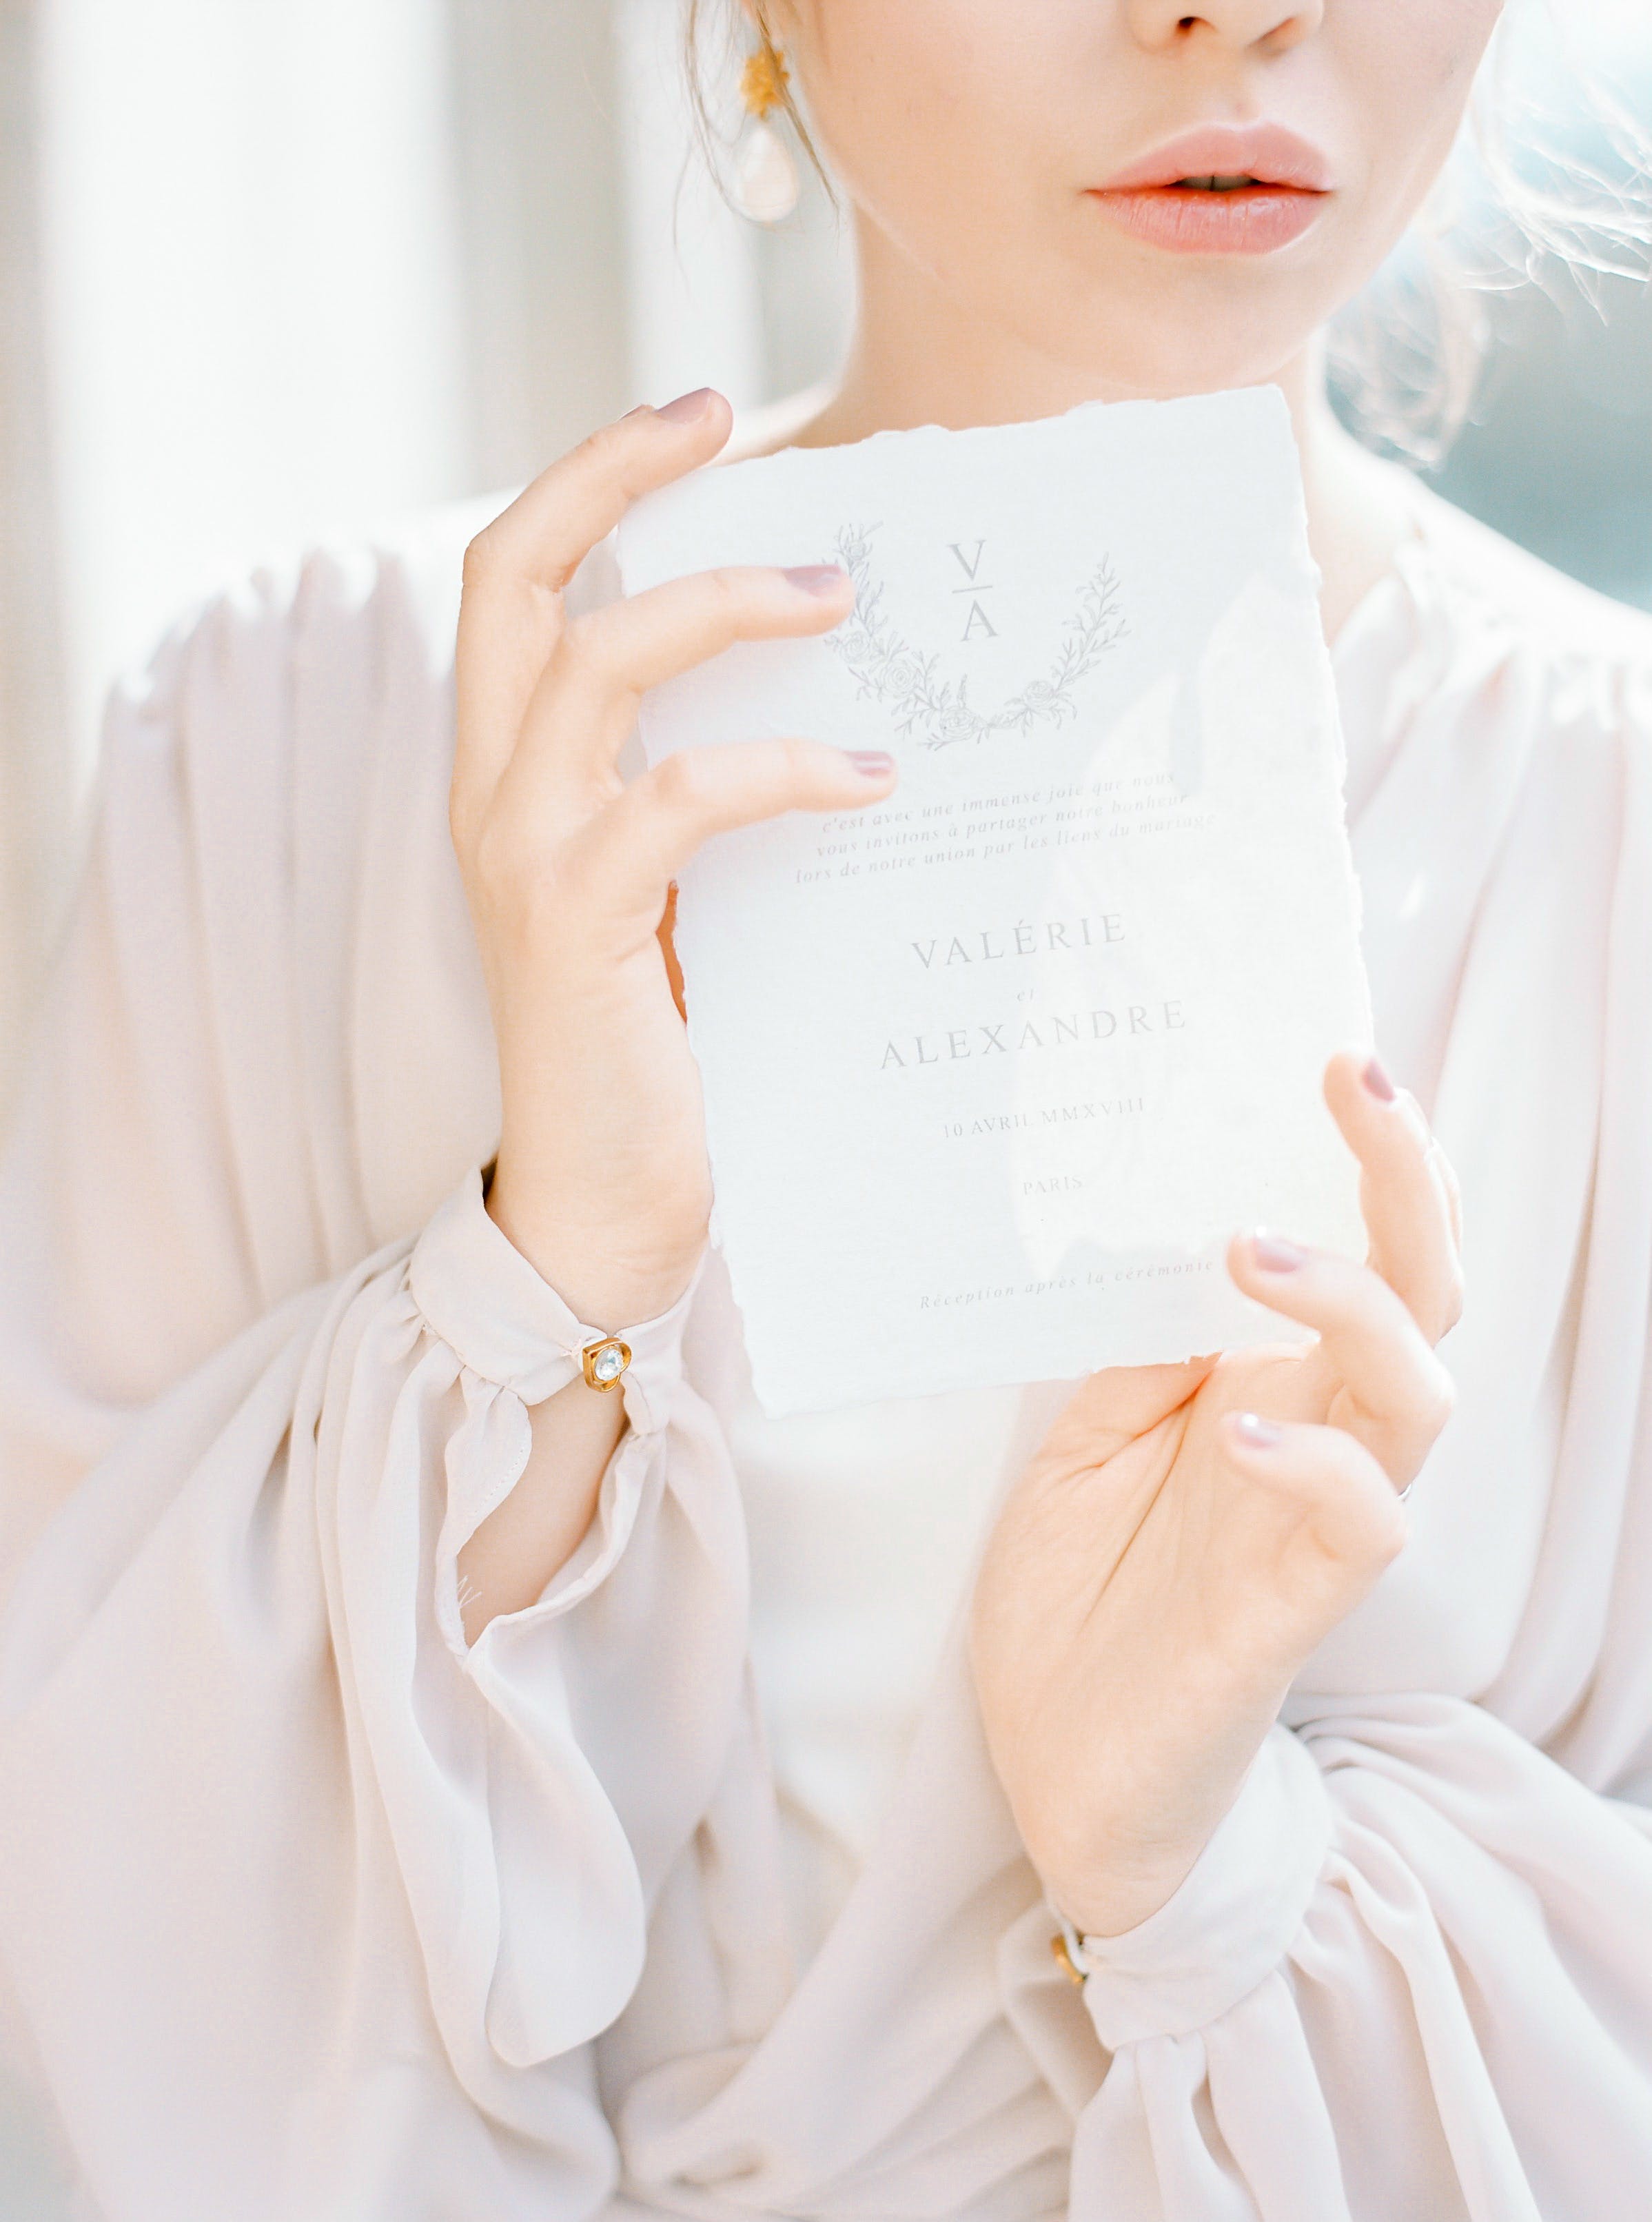 A woman holding a wedding invitation | Source: Pexels